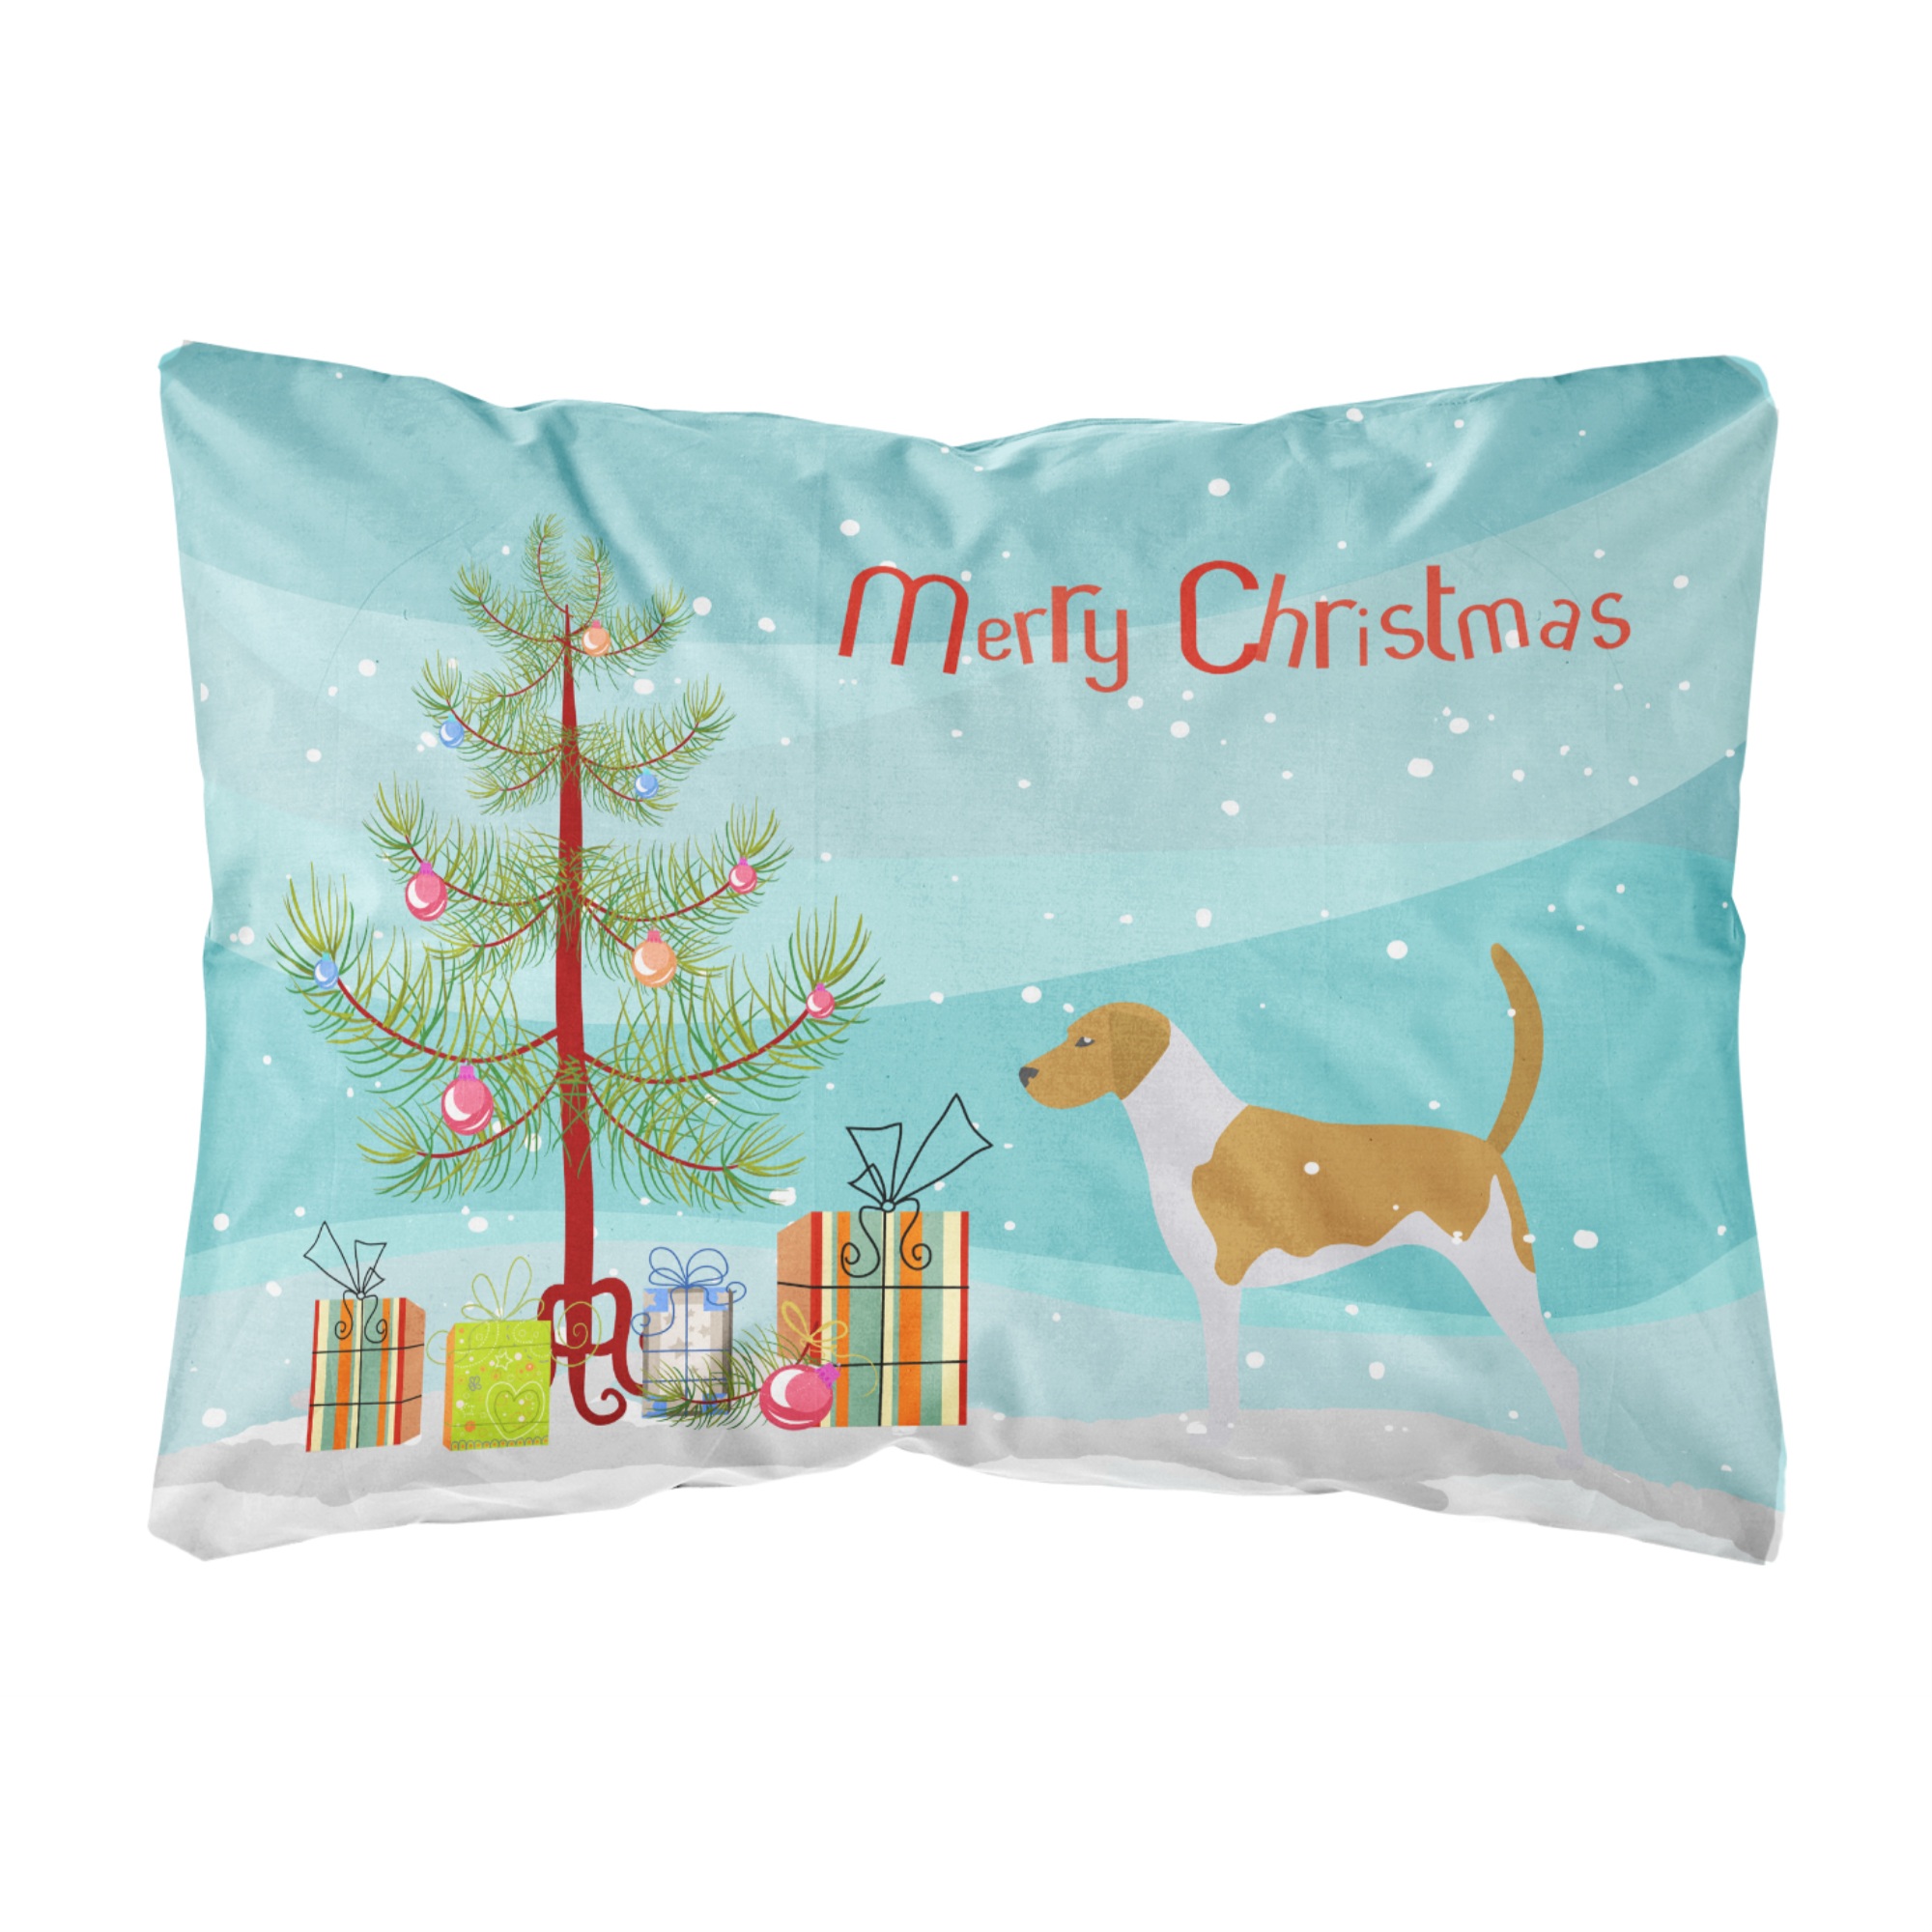 Caroline's Treasures "Caroline's Treasures BB2916PW1216 American Foxhound Merry Christmas Tree Canvas Fabric Decorative Pillow, 12"" x 16"", Multicol